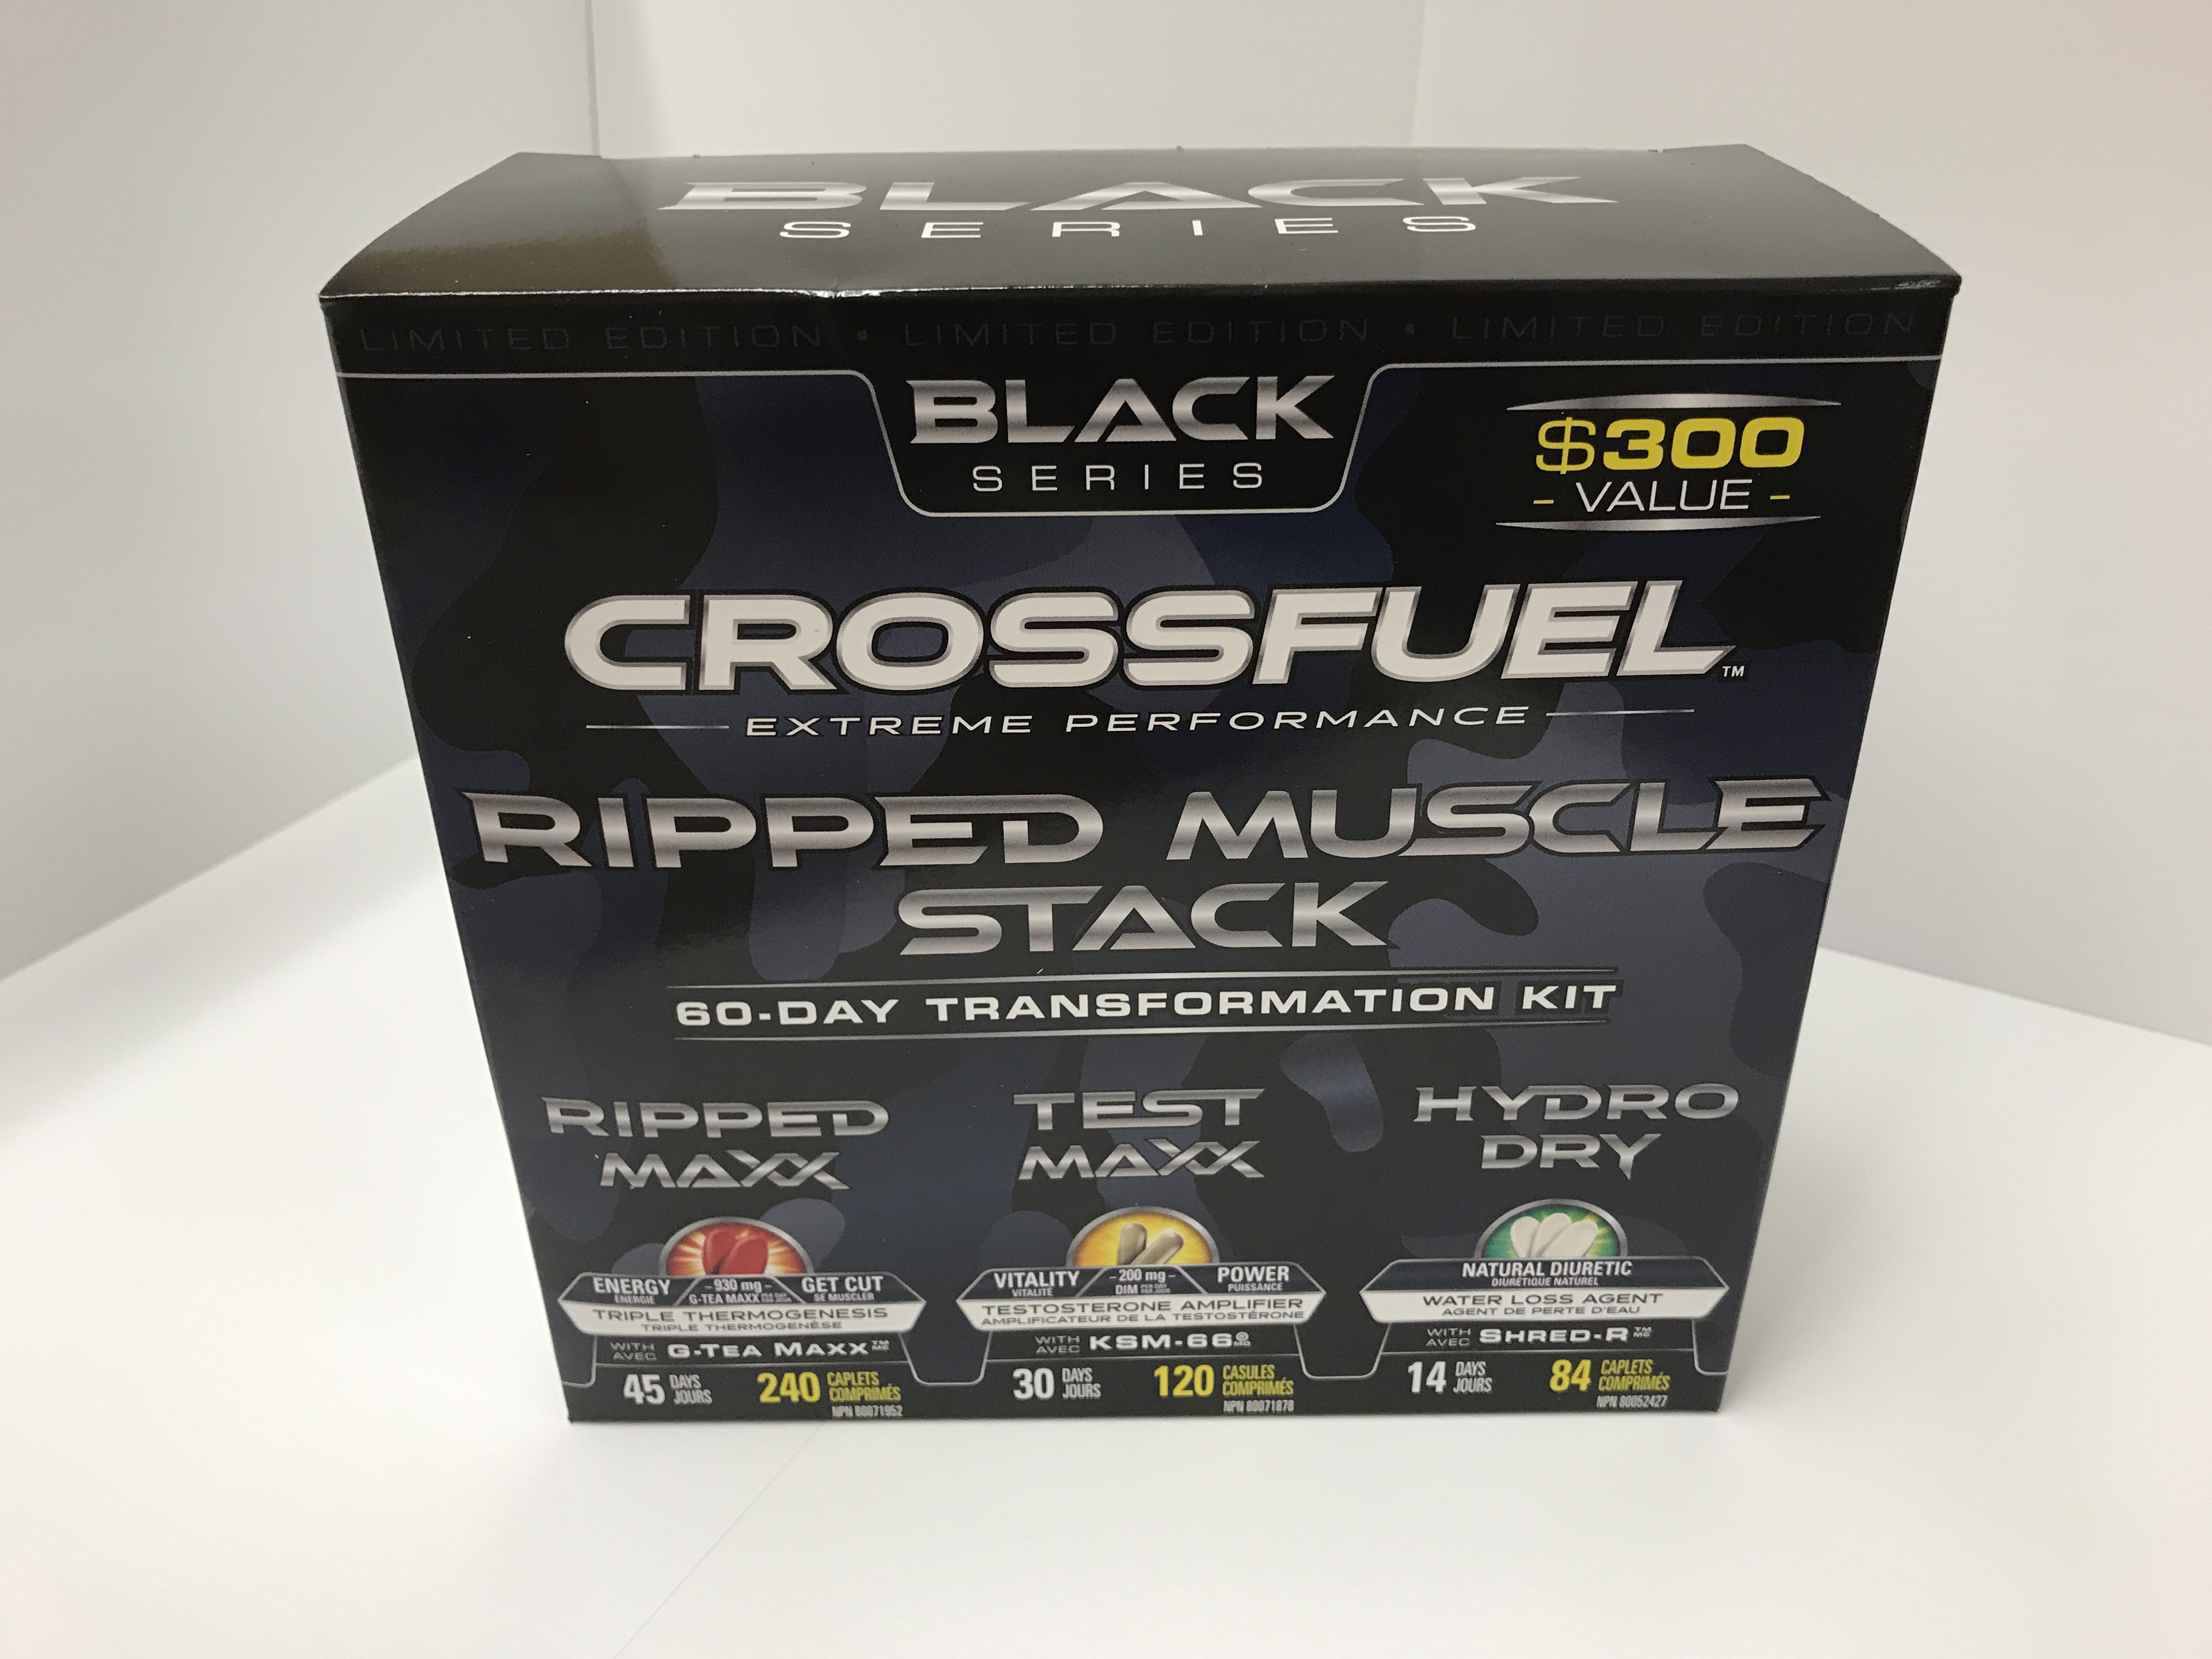 Alliance Creative Group (ACGX) Produced New Packaging for Crossfuel Extreme Performance Black Series